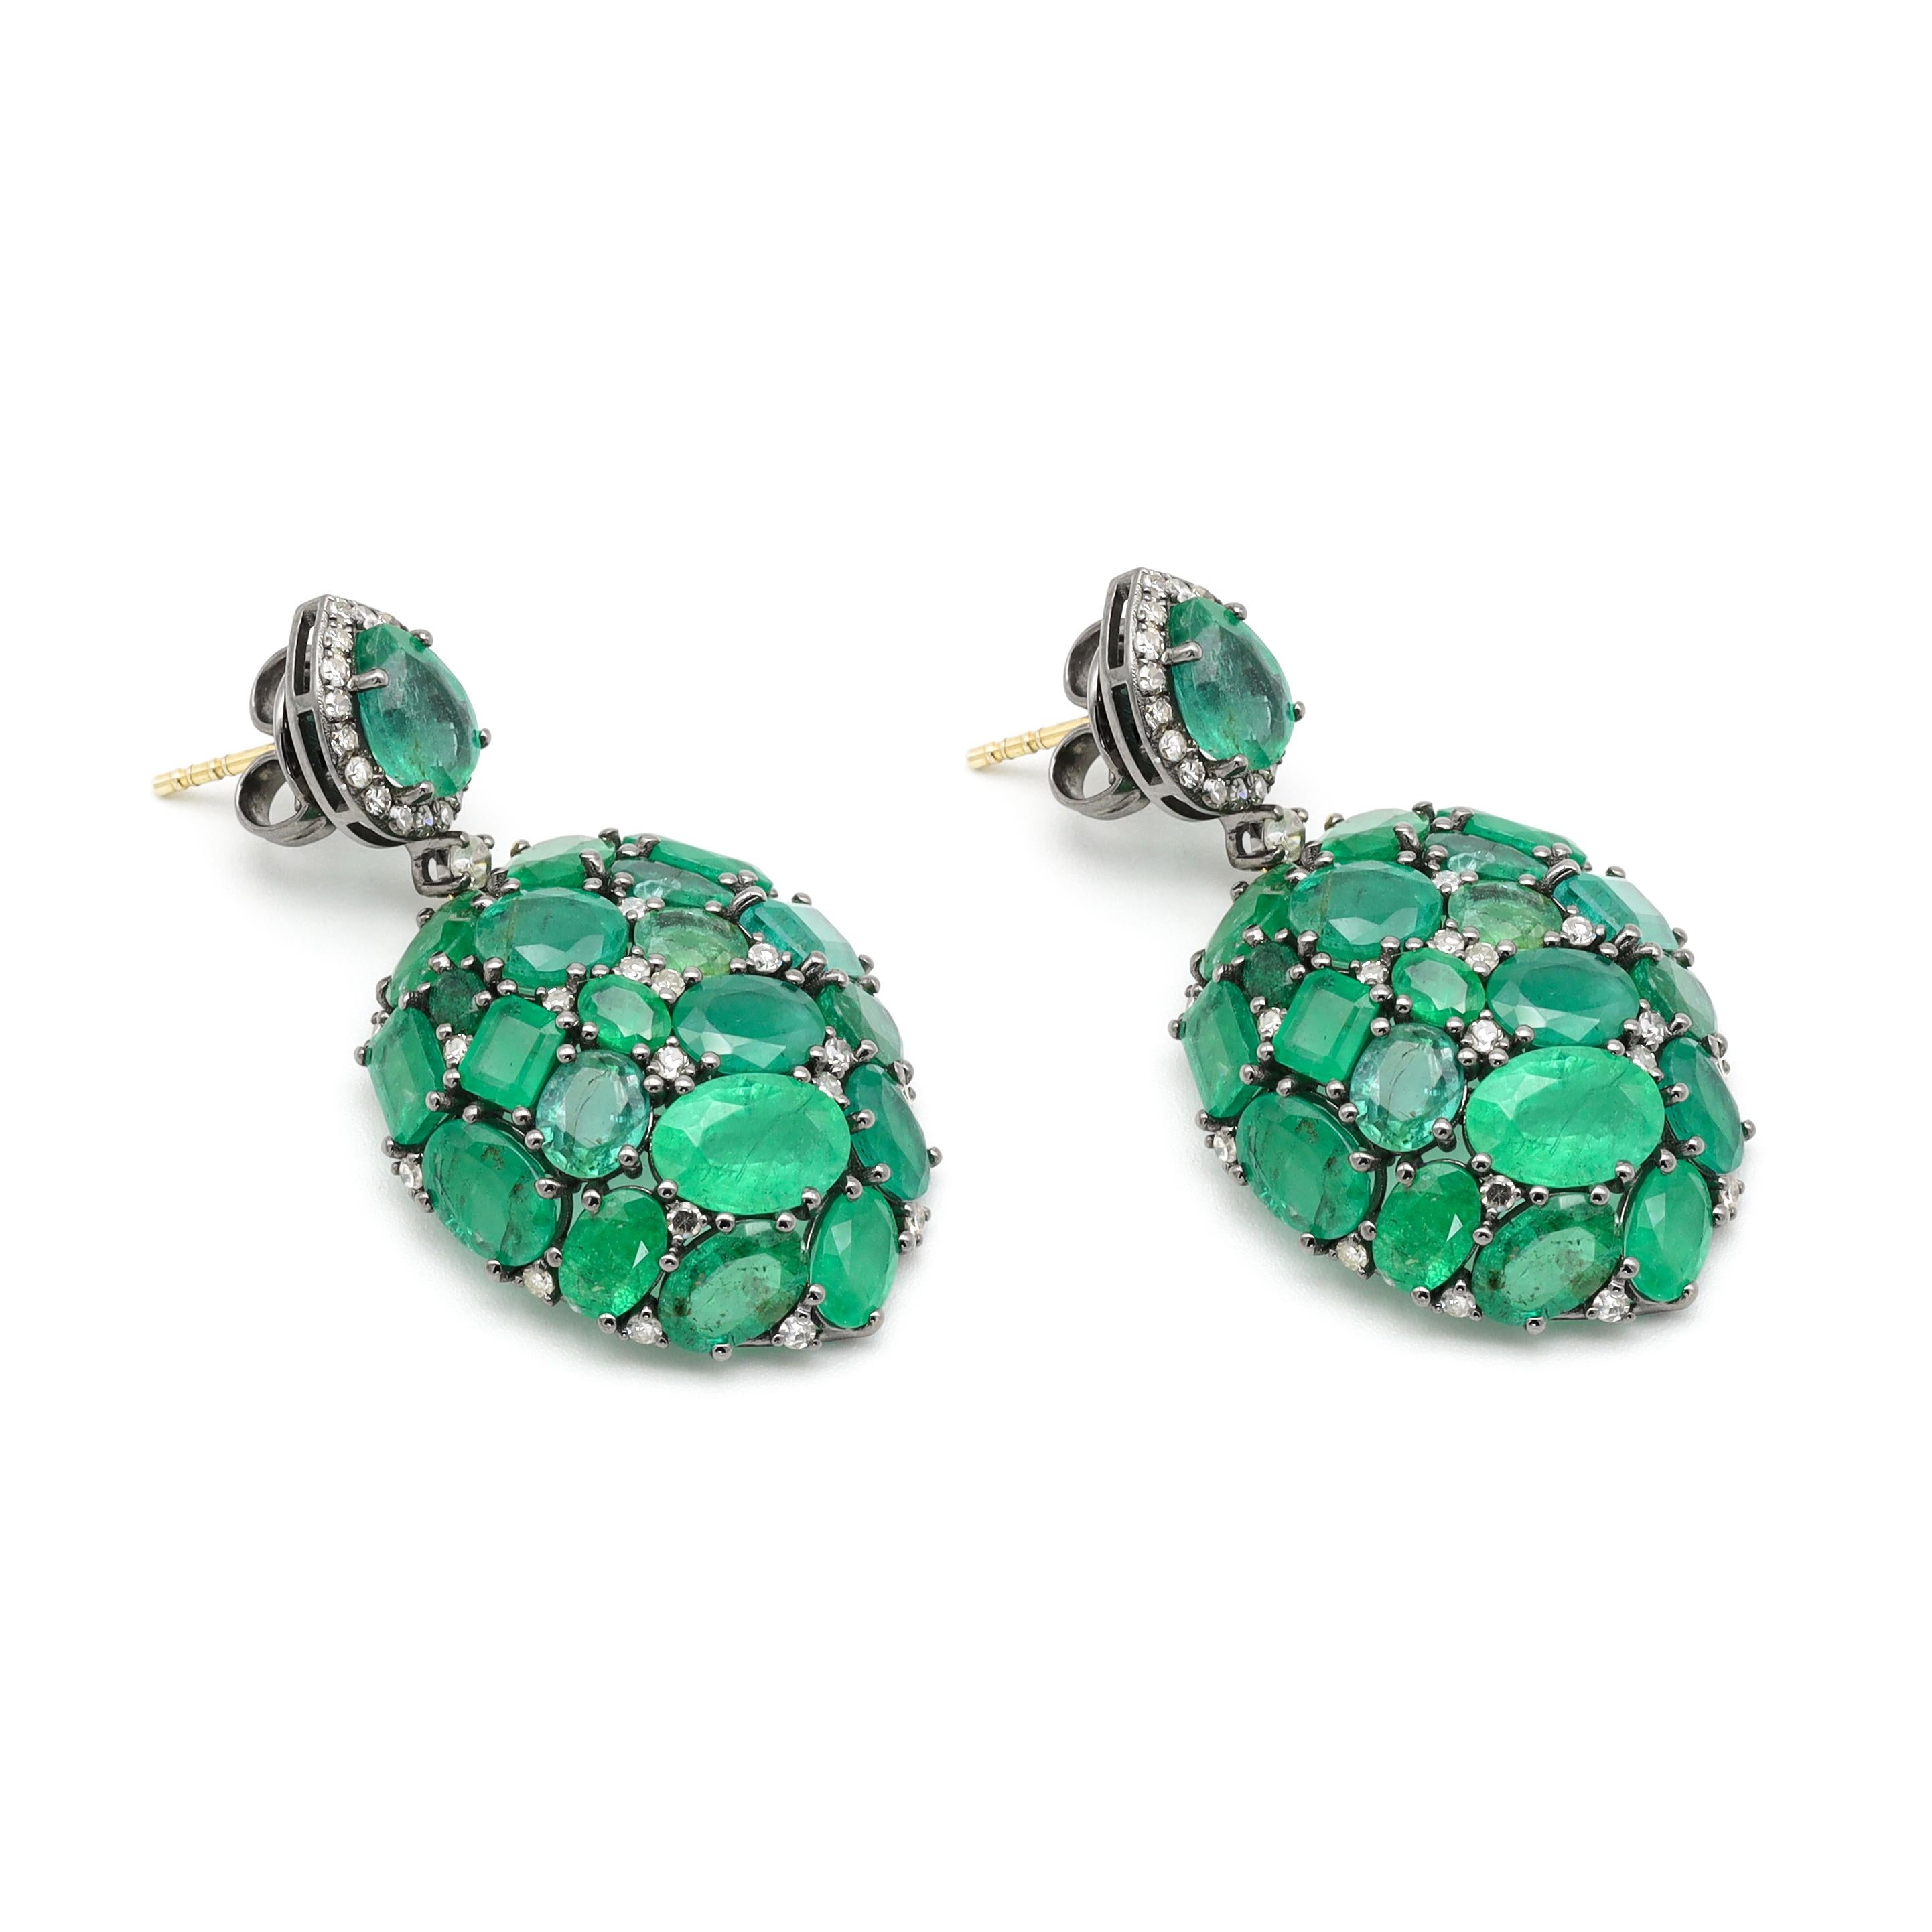 Natural Emerald and Diamond Teardrop Earrings

This Victorian-era art-deco style fascinating lush green emerald teardrop style earring is graceful. The mixed size and shape of solitaire emeralds are beautifully placed to form the domed teardrop